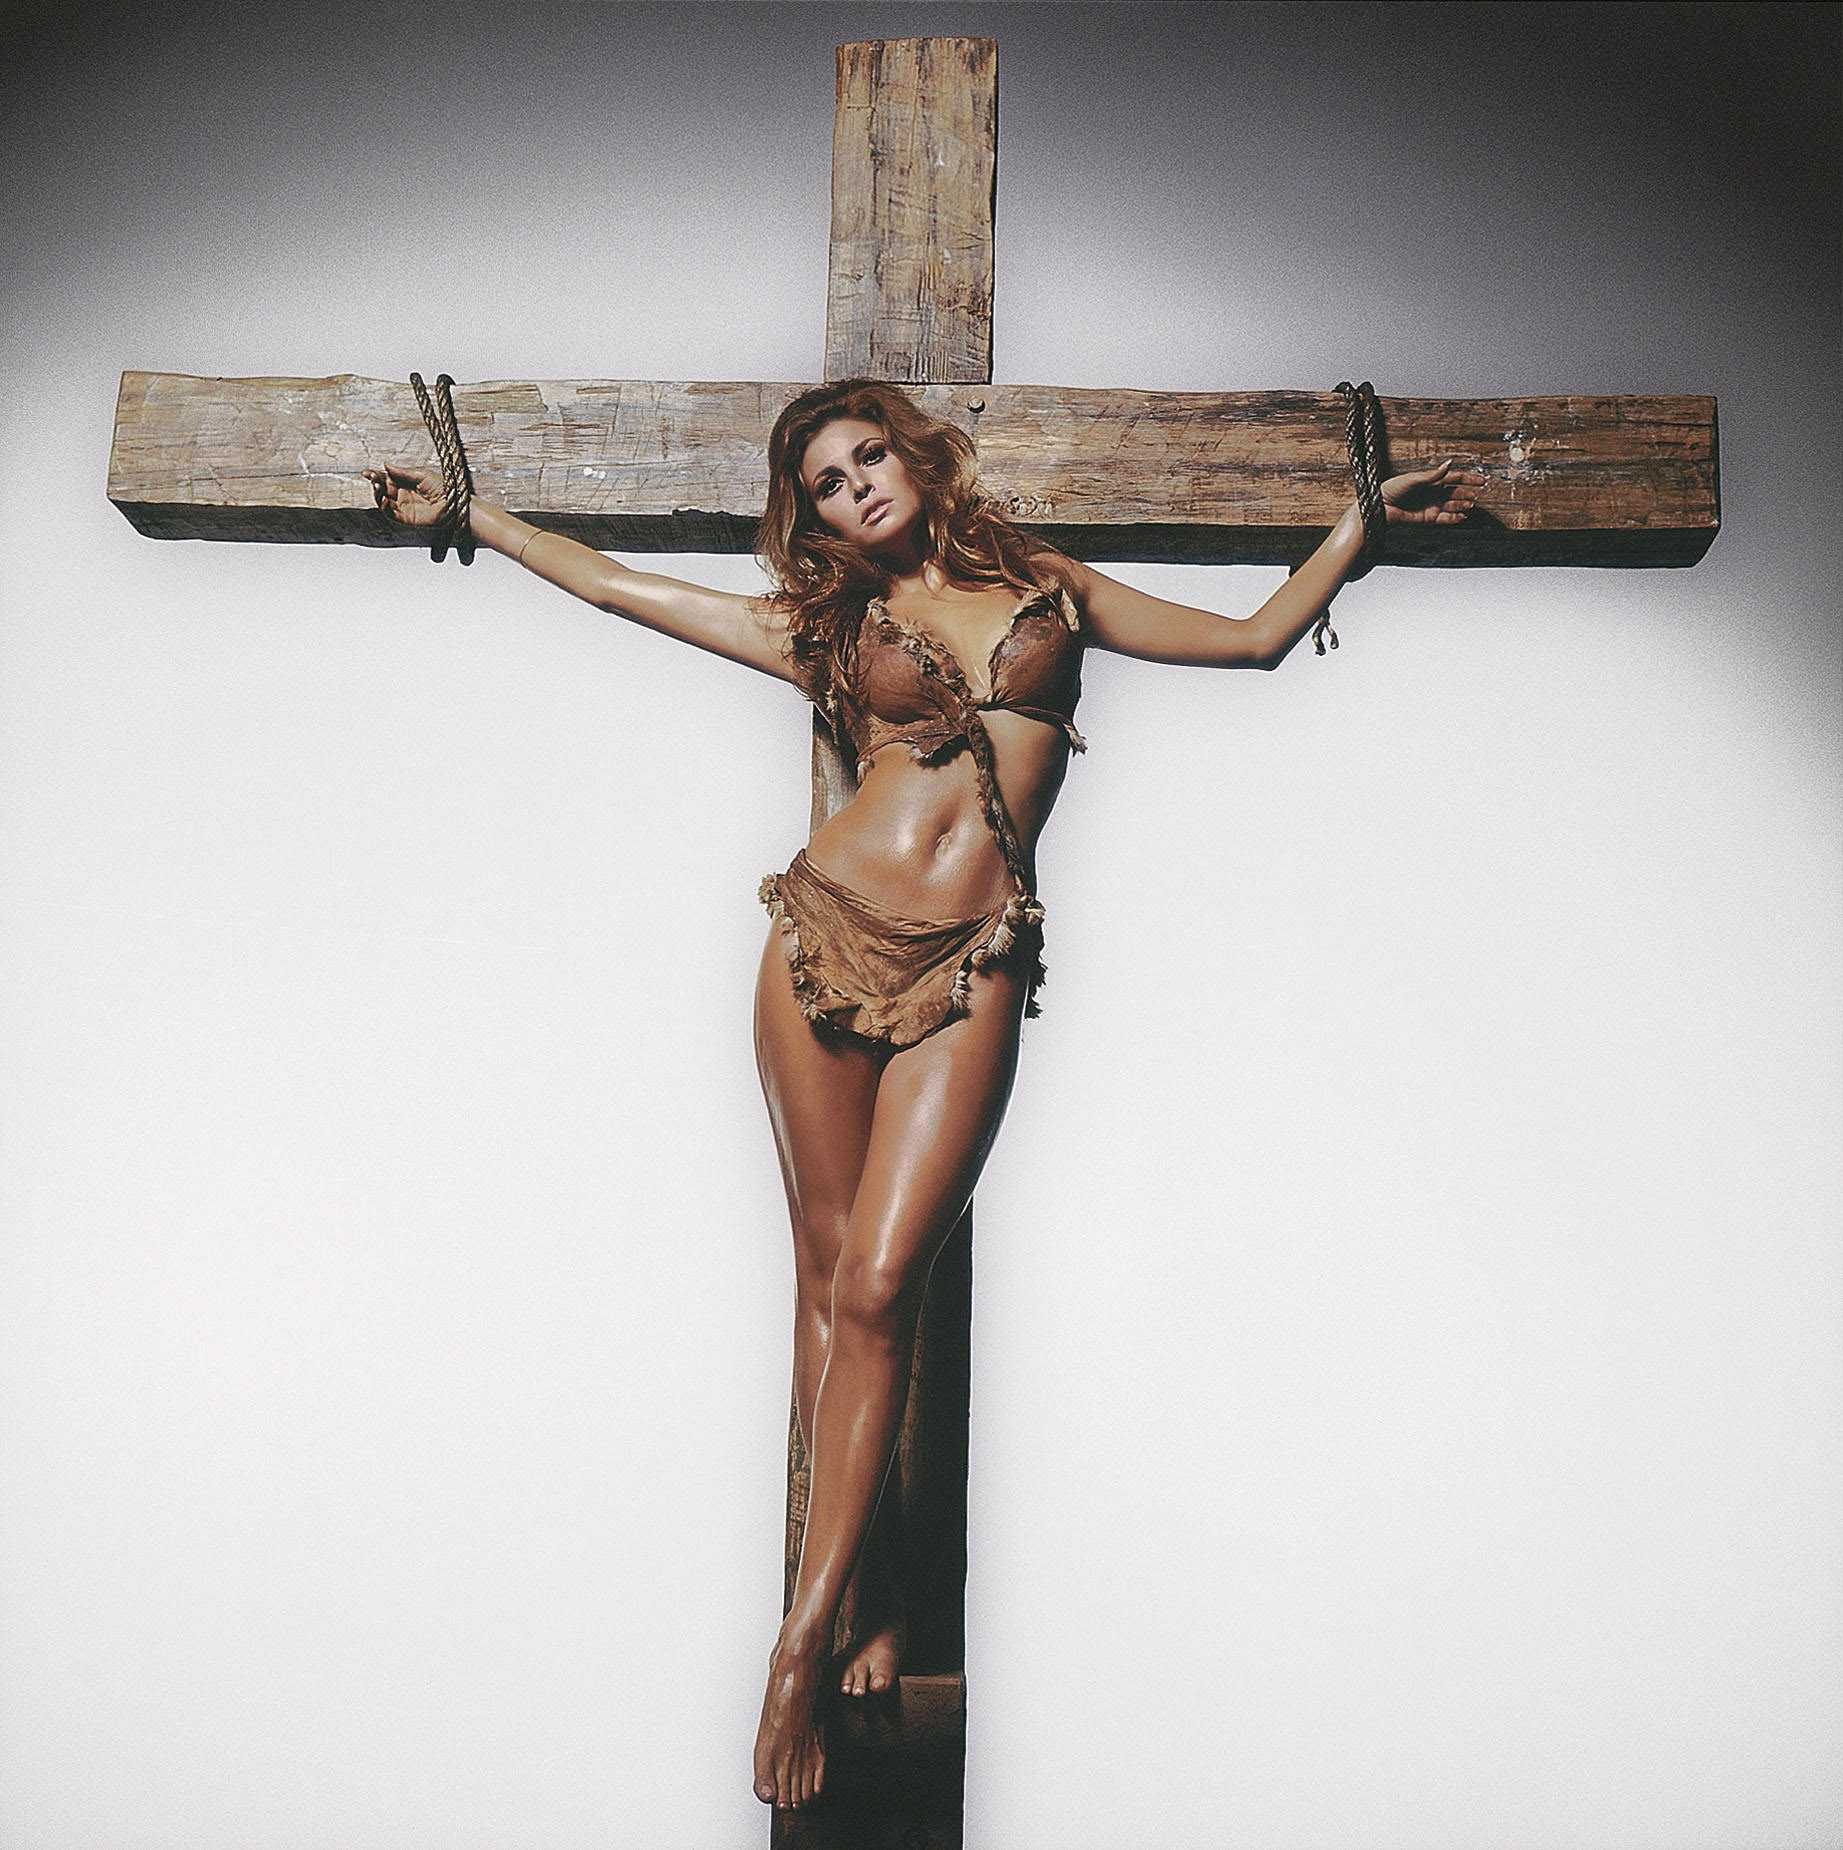 Terry O’Neill, Raquel Welch on the Cross, for Esquire Magazine